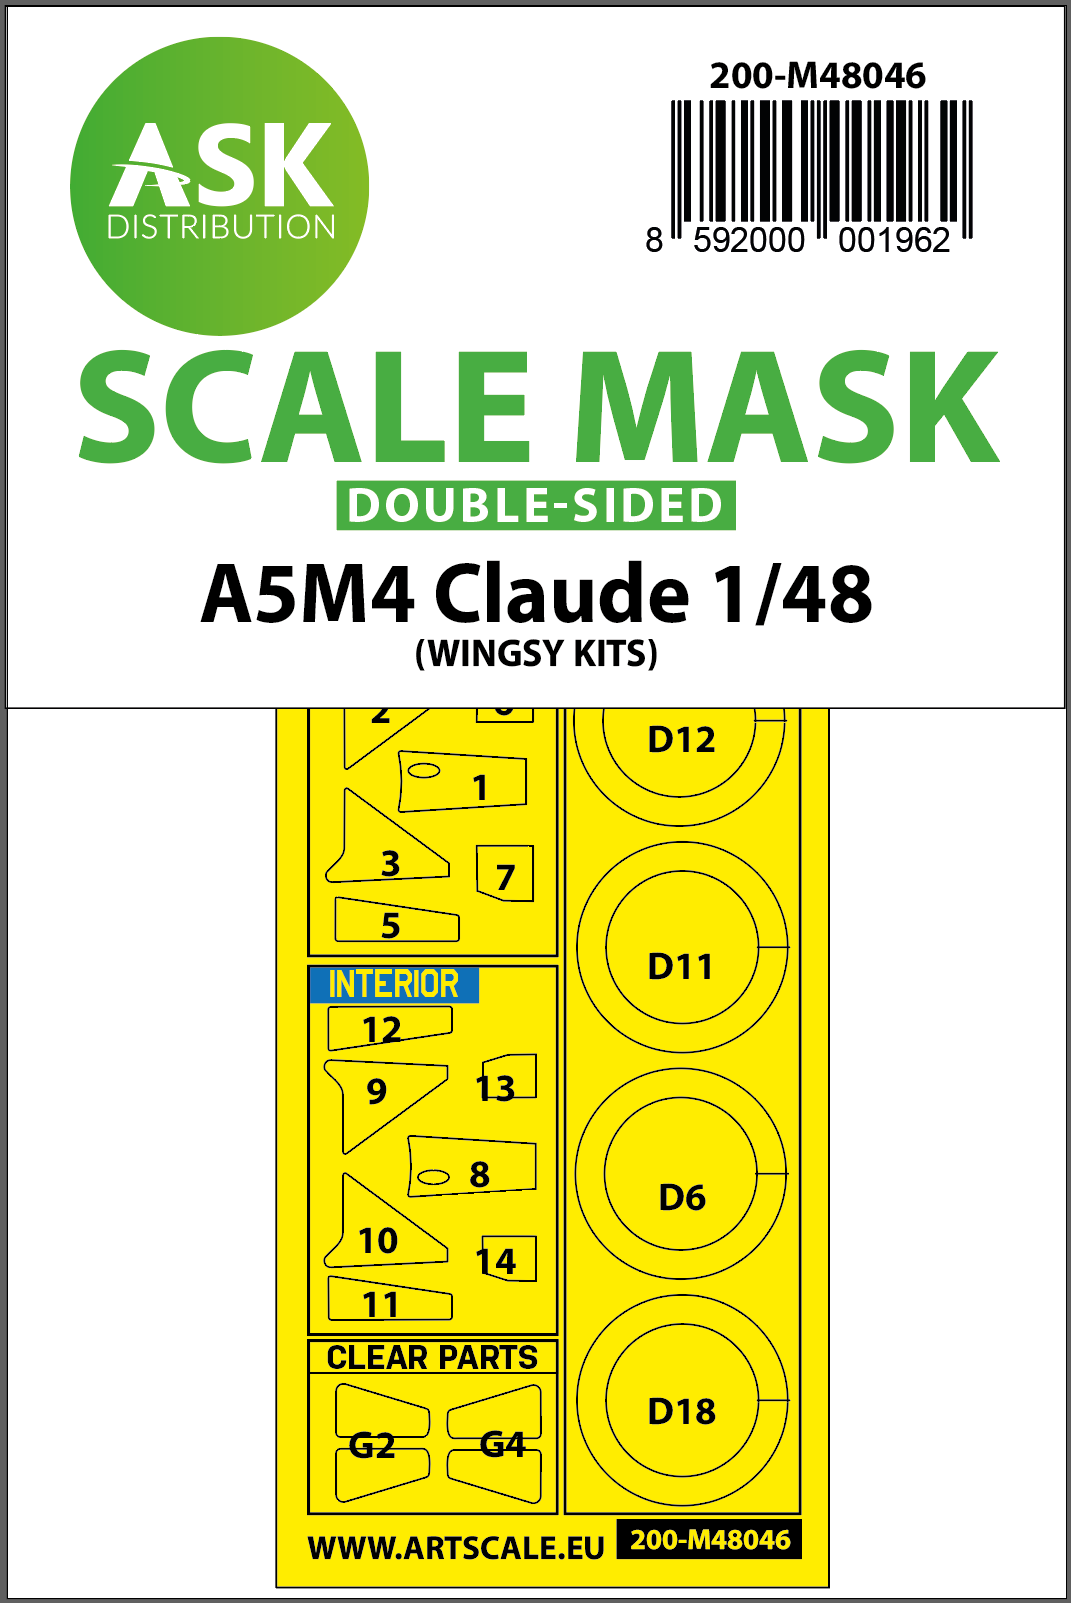 1/48 A5M4 Claude double-sided painting mask for Wingsy kits